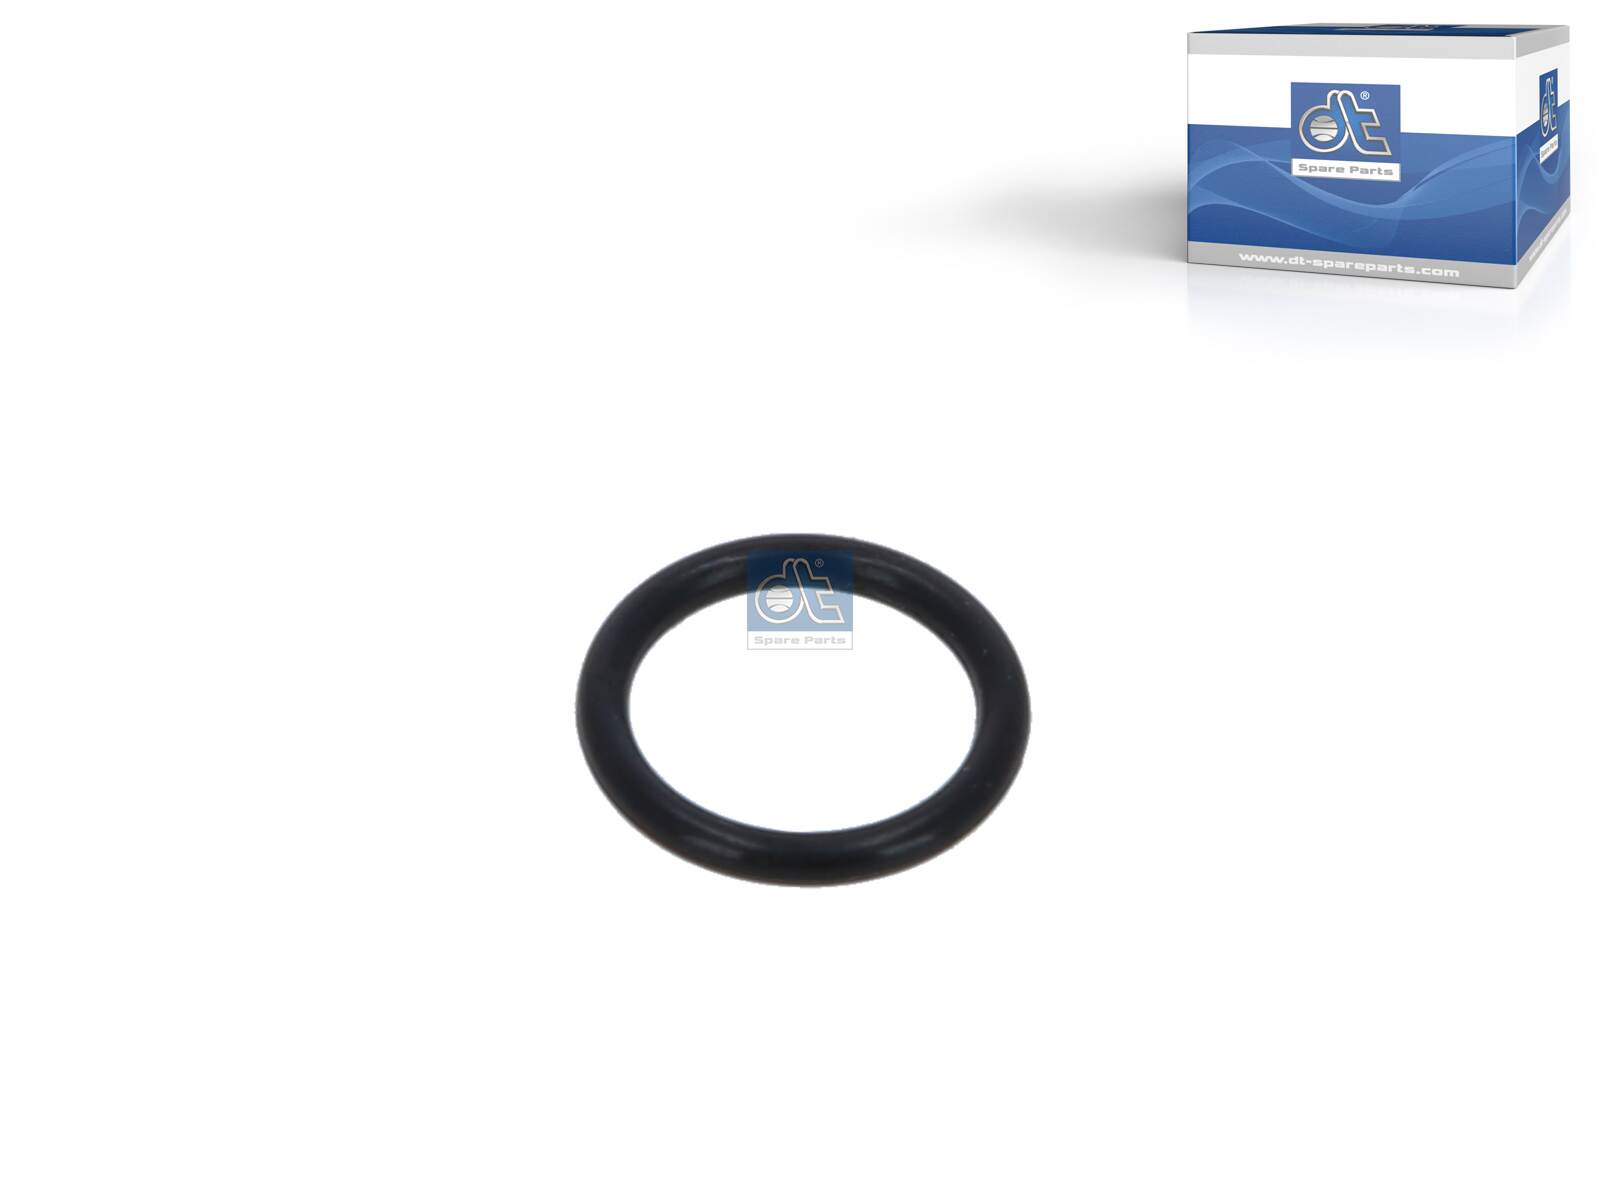 2.12501, Seal Ring, DT Spare Parts, 7400976971, 976971, 100790, 10,1X1,6,NBR, 40-76810-00, OR-6971, 101X16NBR, 1257106, 20852764, 7420852764